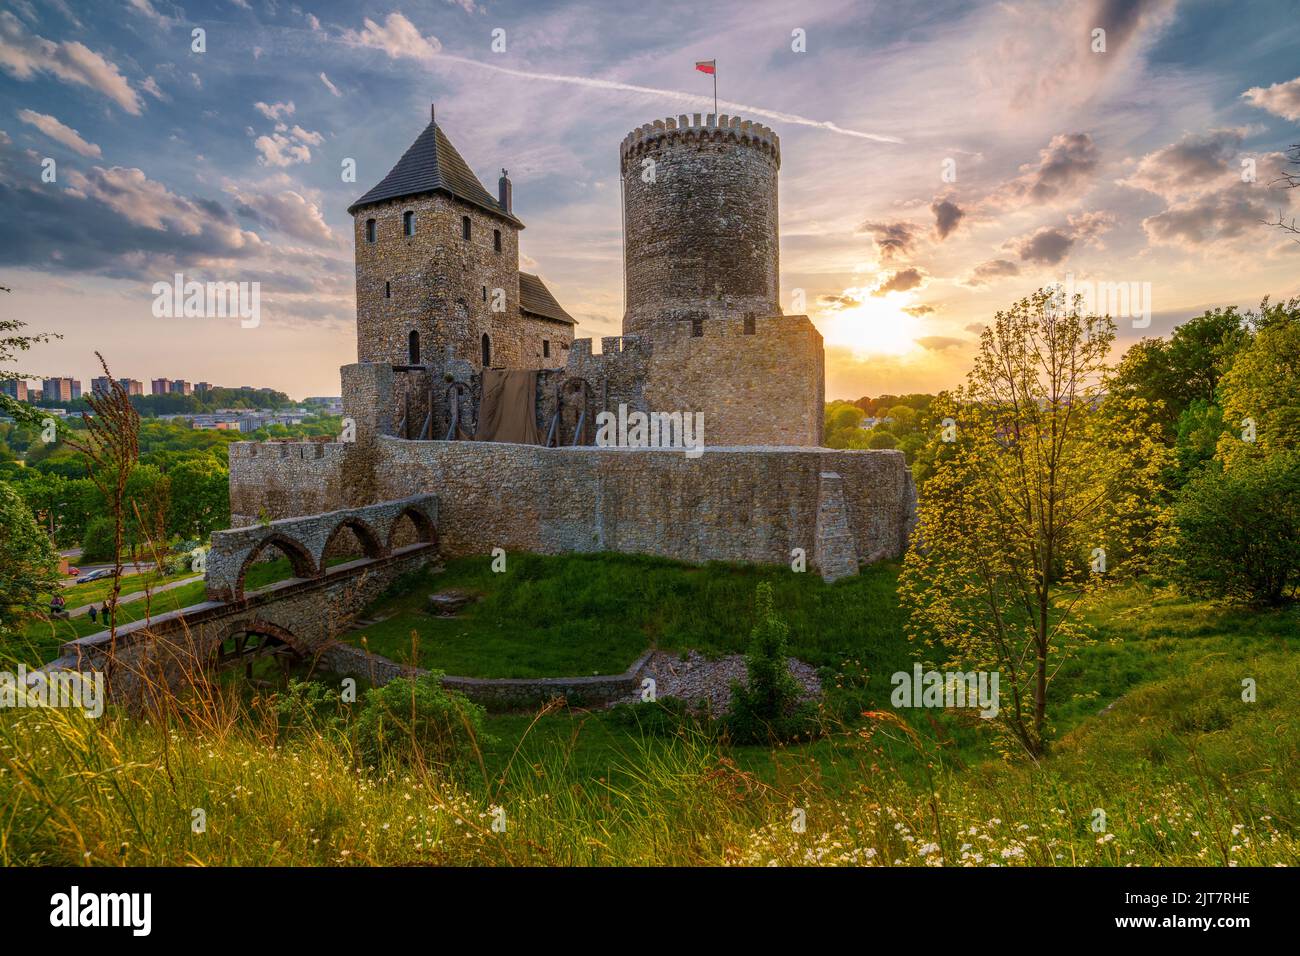 The Piast dynasty stone Castle in Bedzin, Silesian Voivodeship, Poland. Building from the 14th century, medieval. Good weather, coluds and  sunset. Stock Photo